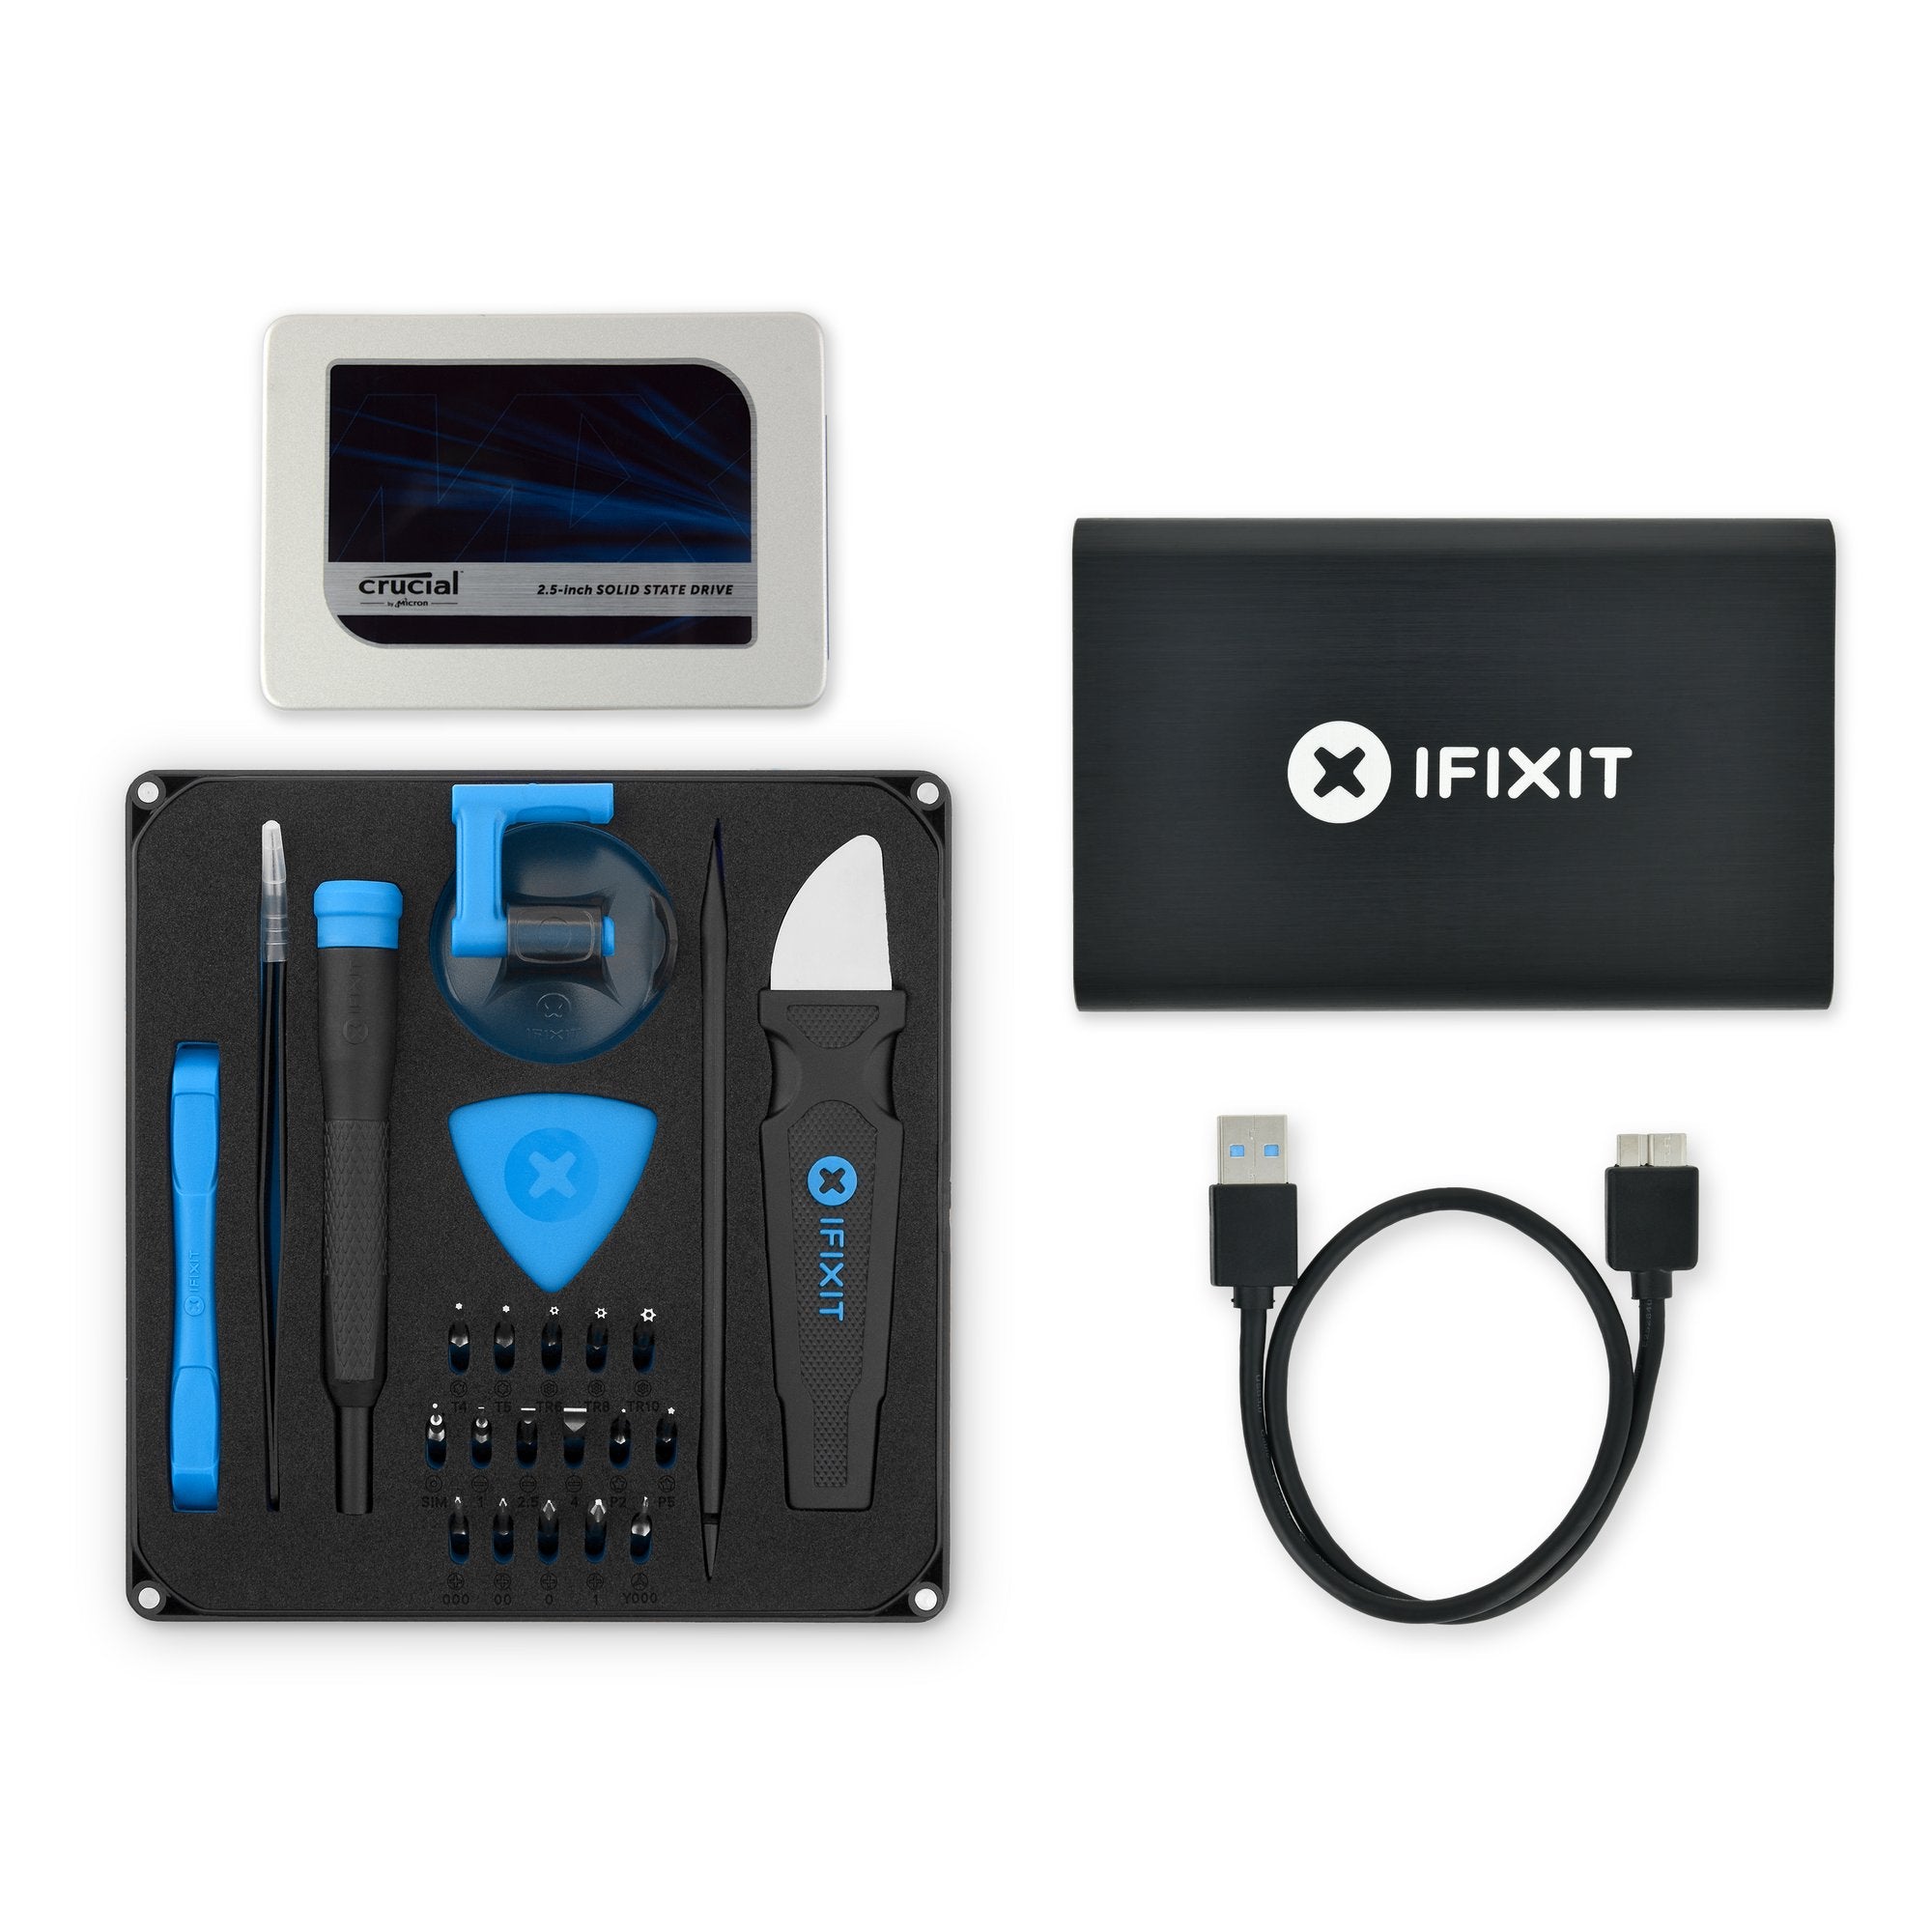 Crucial MX500 1 TB SSD—Your complete iFixit Fix Kit: a Crucial SSD